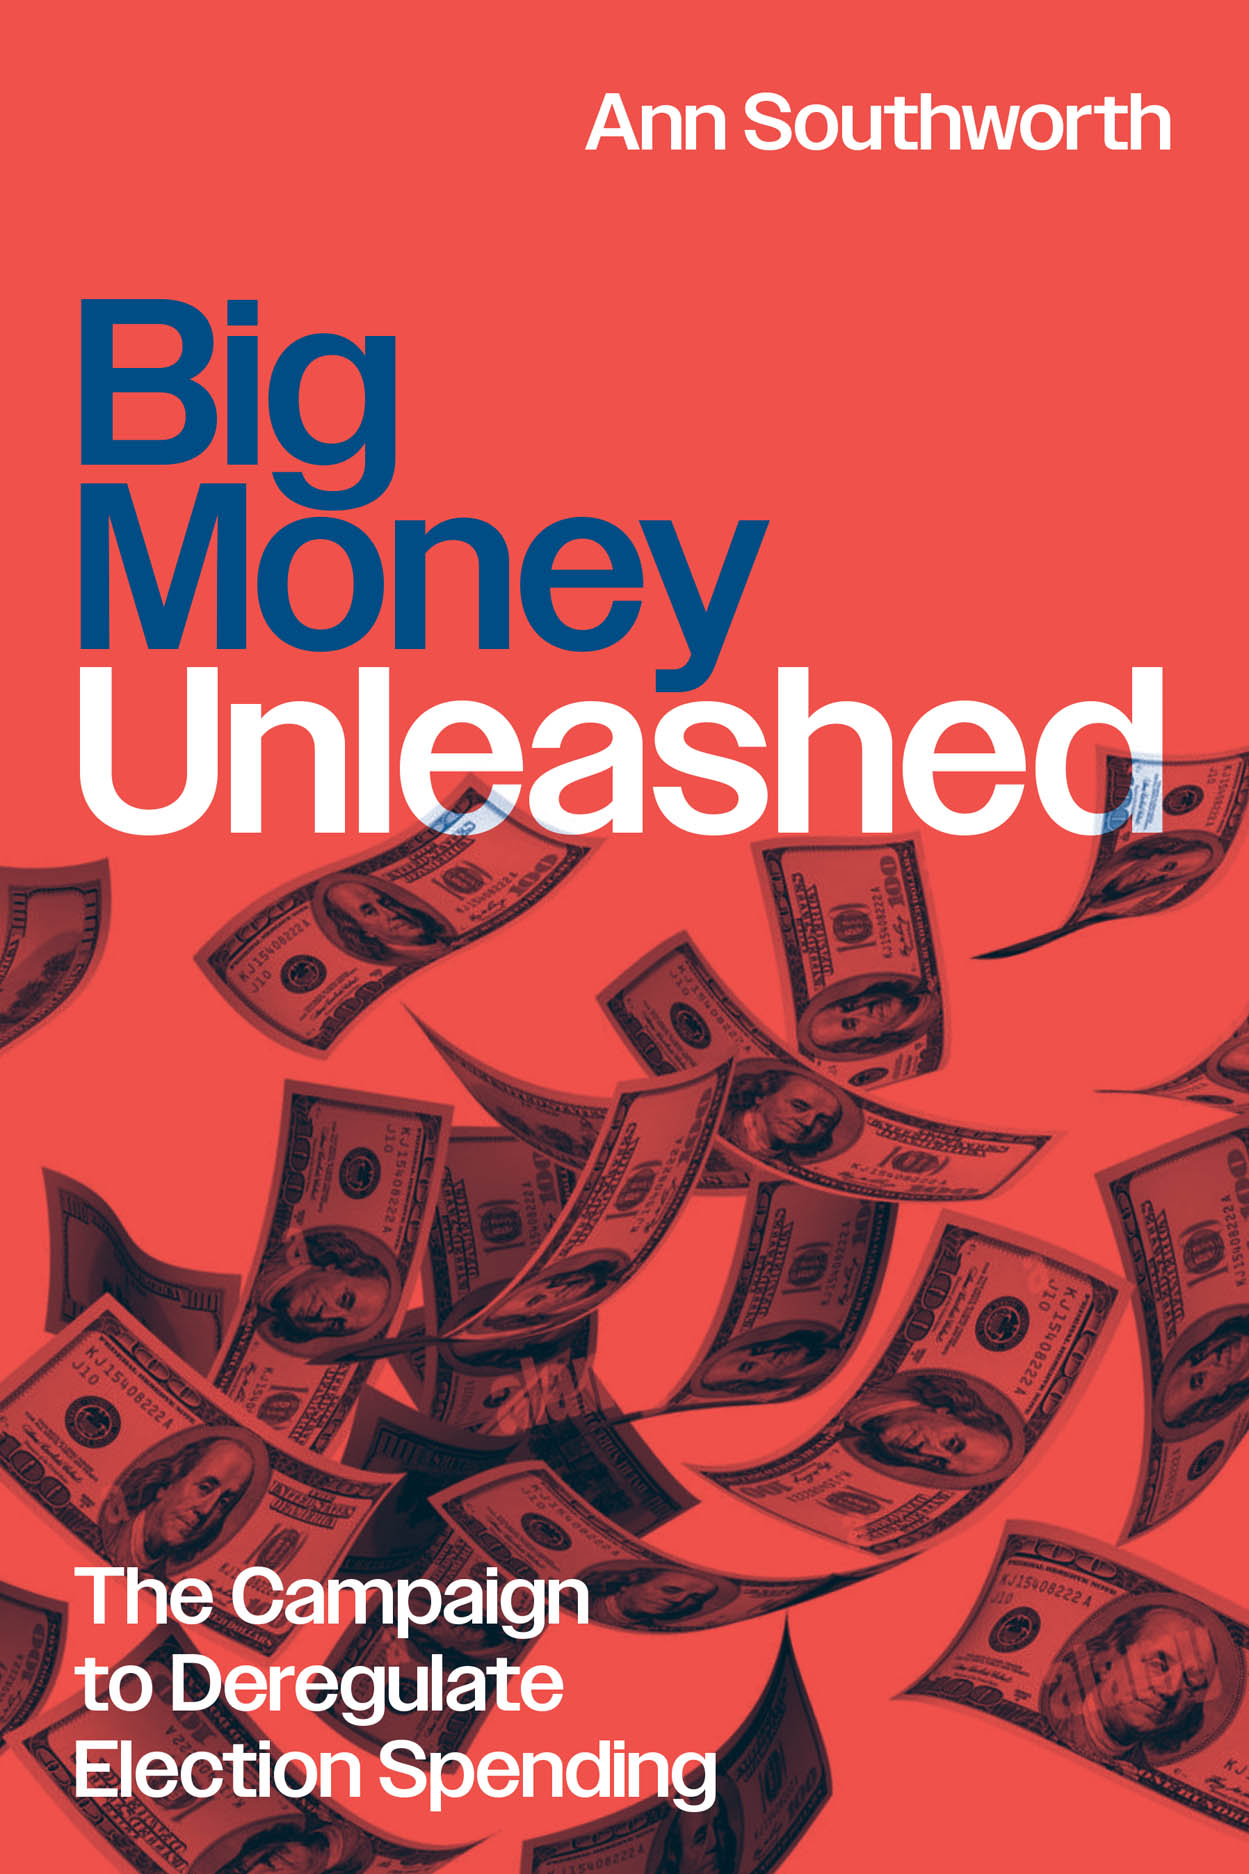 Five Questions with Ann Southworth author of “Big Money Unleashed: The Campaign to Deregulate Election Spending”